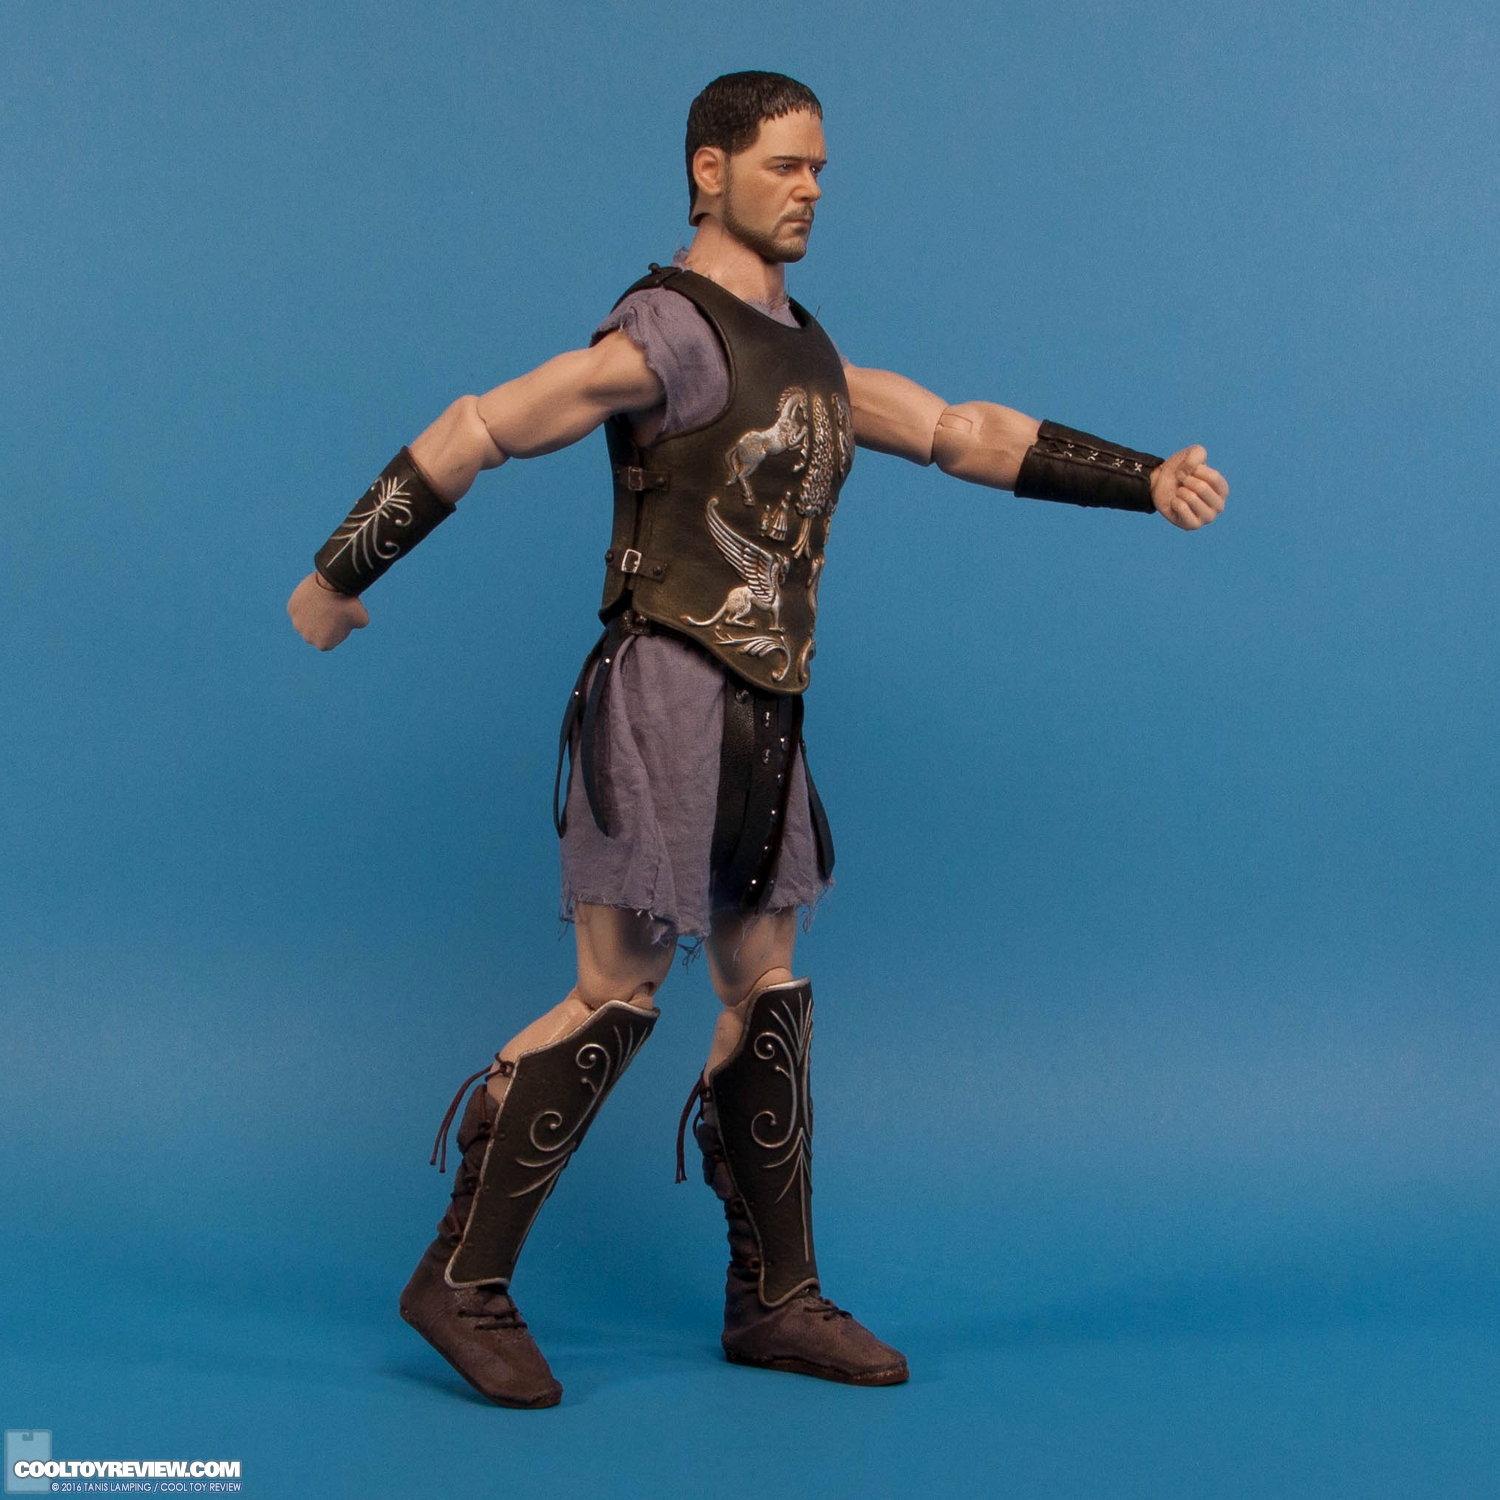 pangaea-toy-gladiator-general-sixth-scale-collectible-figure-018.jpg